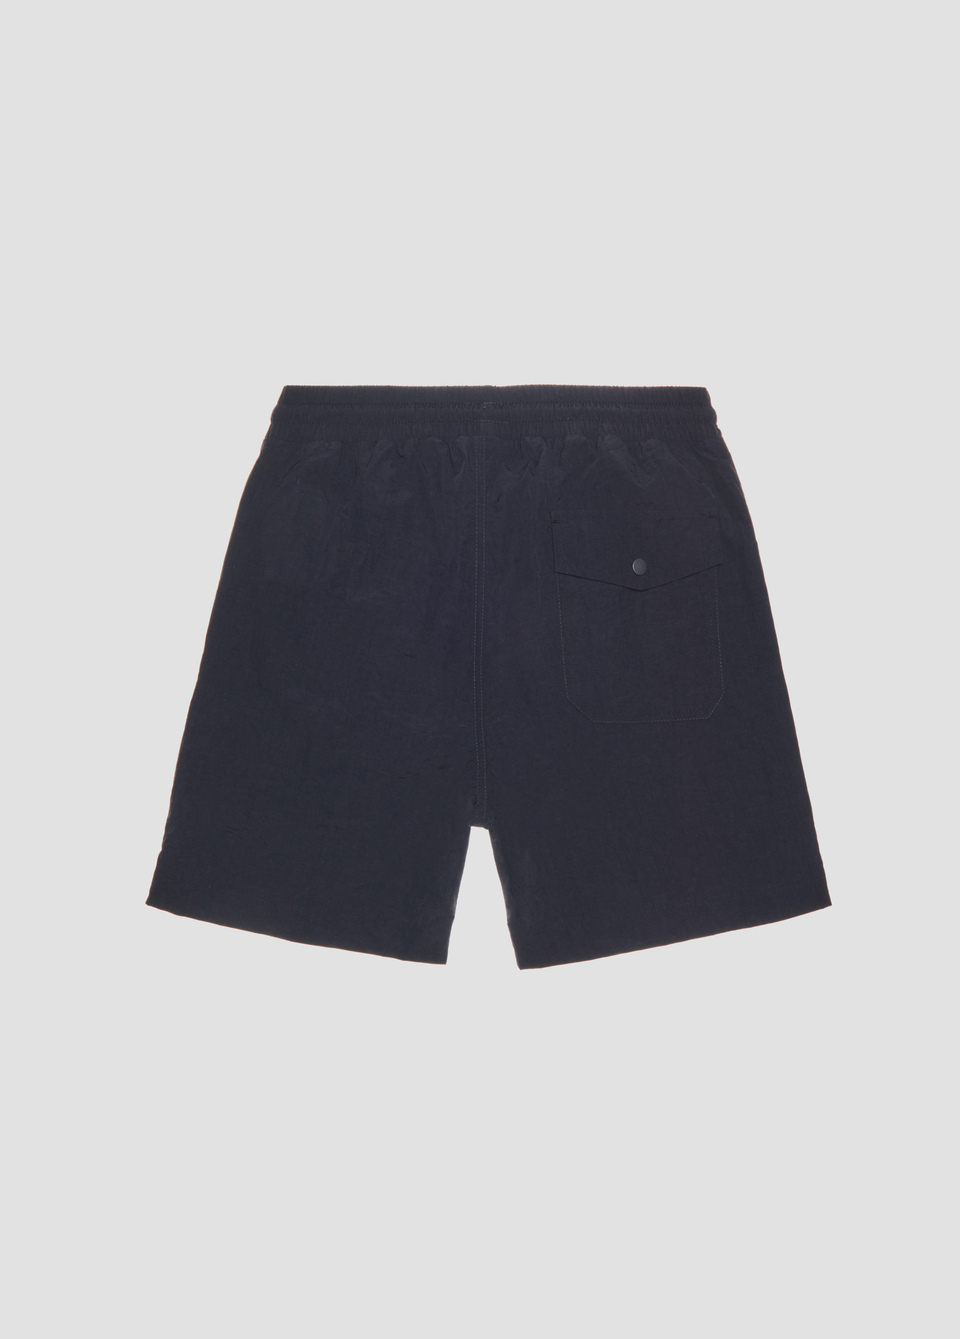 REGULAR FIT SWIMMING TRUNKS IN TECHNICAL FABRIC WITH LOGO PATCH - Antony Morato Online Shop